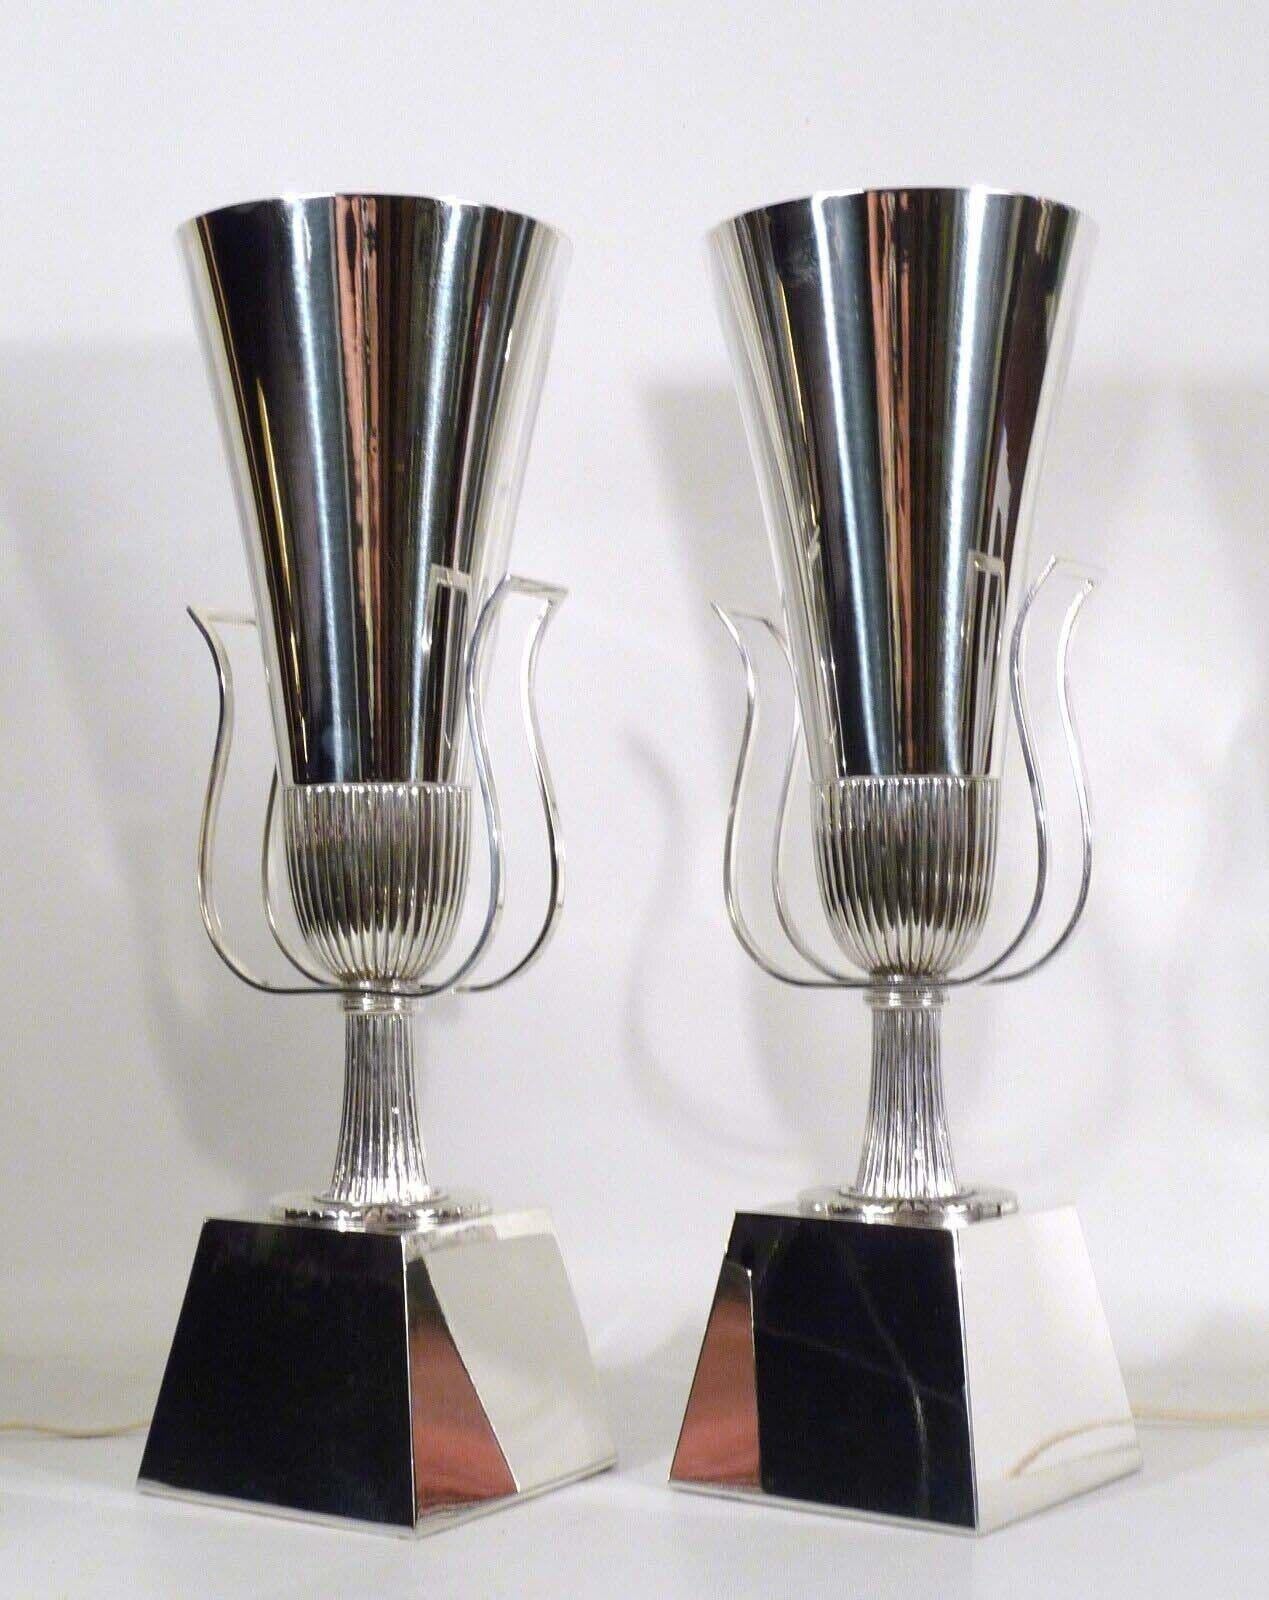 For your consideration is this rare pair (2) of silver plated brass torchiere up lights by Tommi Parzinger from Lightolier's Heritage Silver Collection dating from the 1940s. Listing is for the pair, a single unit is not available. In pristine